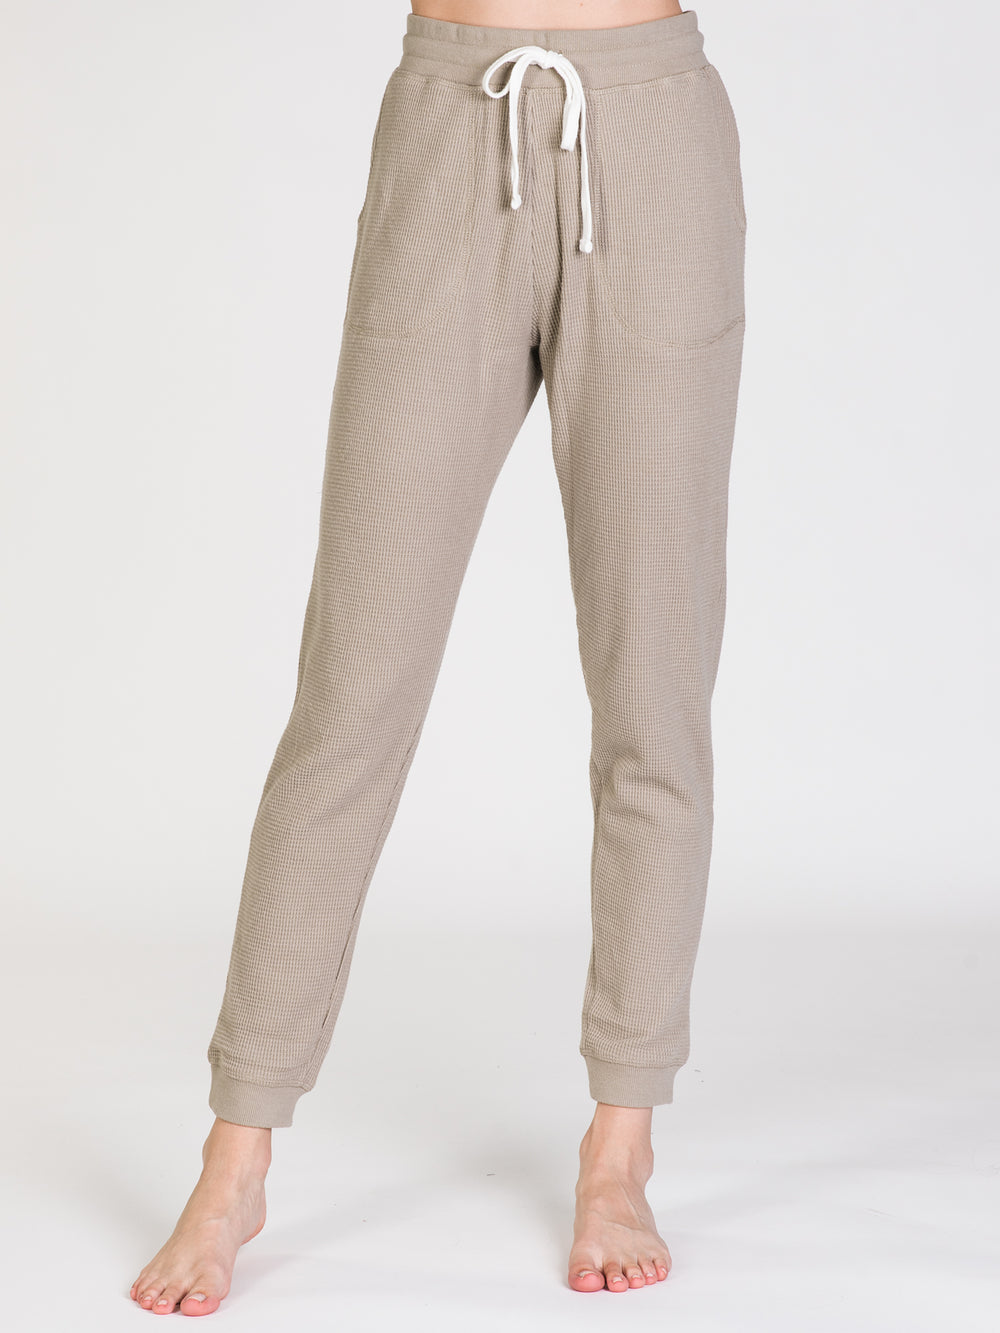 HARLOW OLIVE THERMAL JOGGER - CLEARANCE